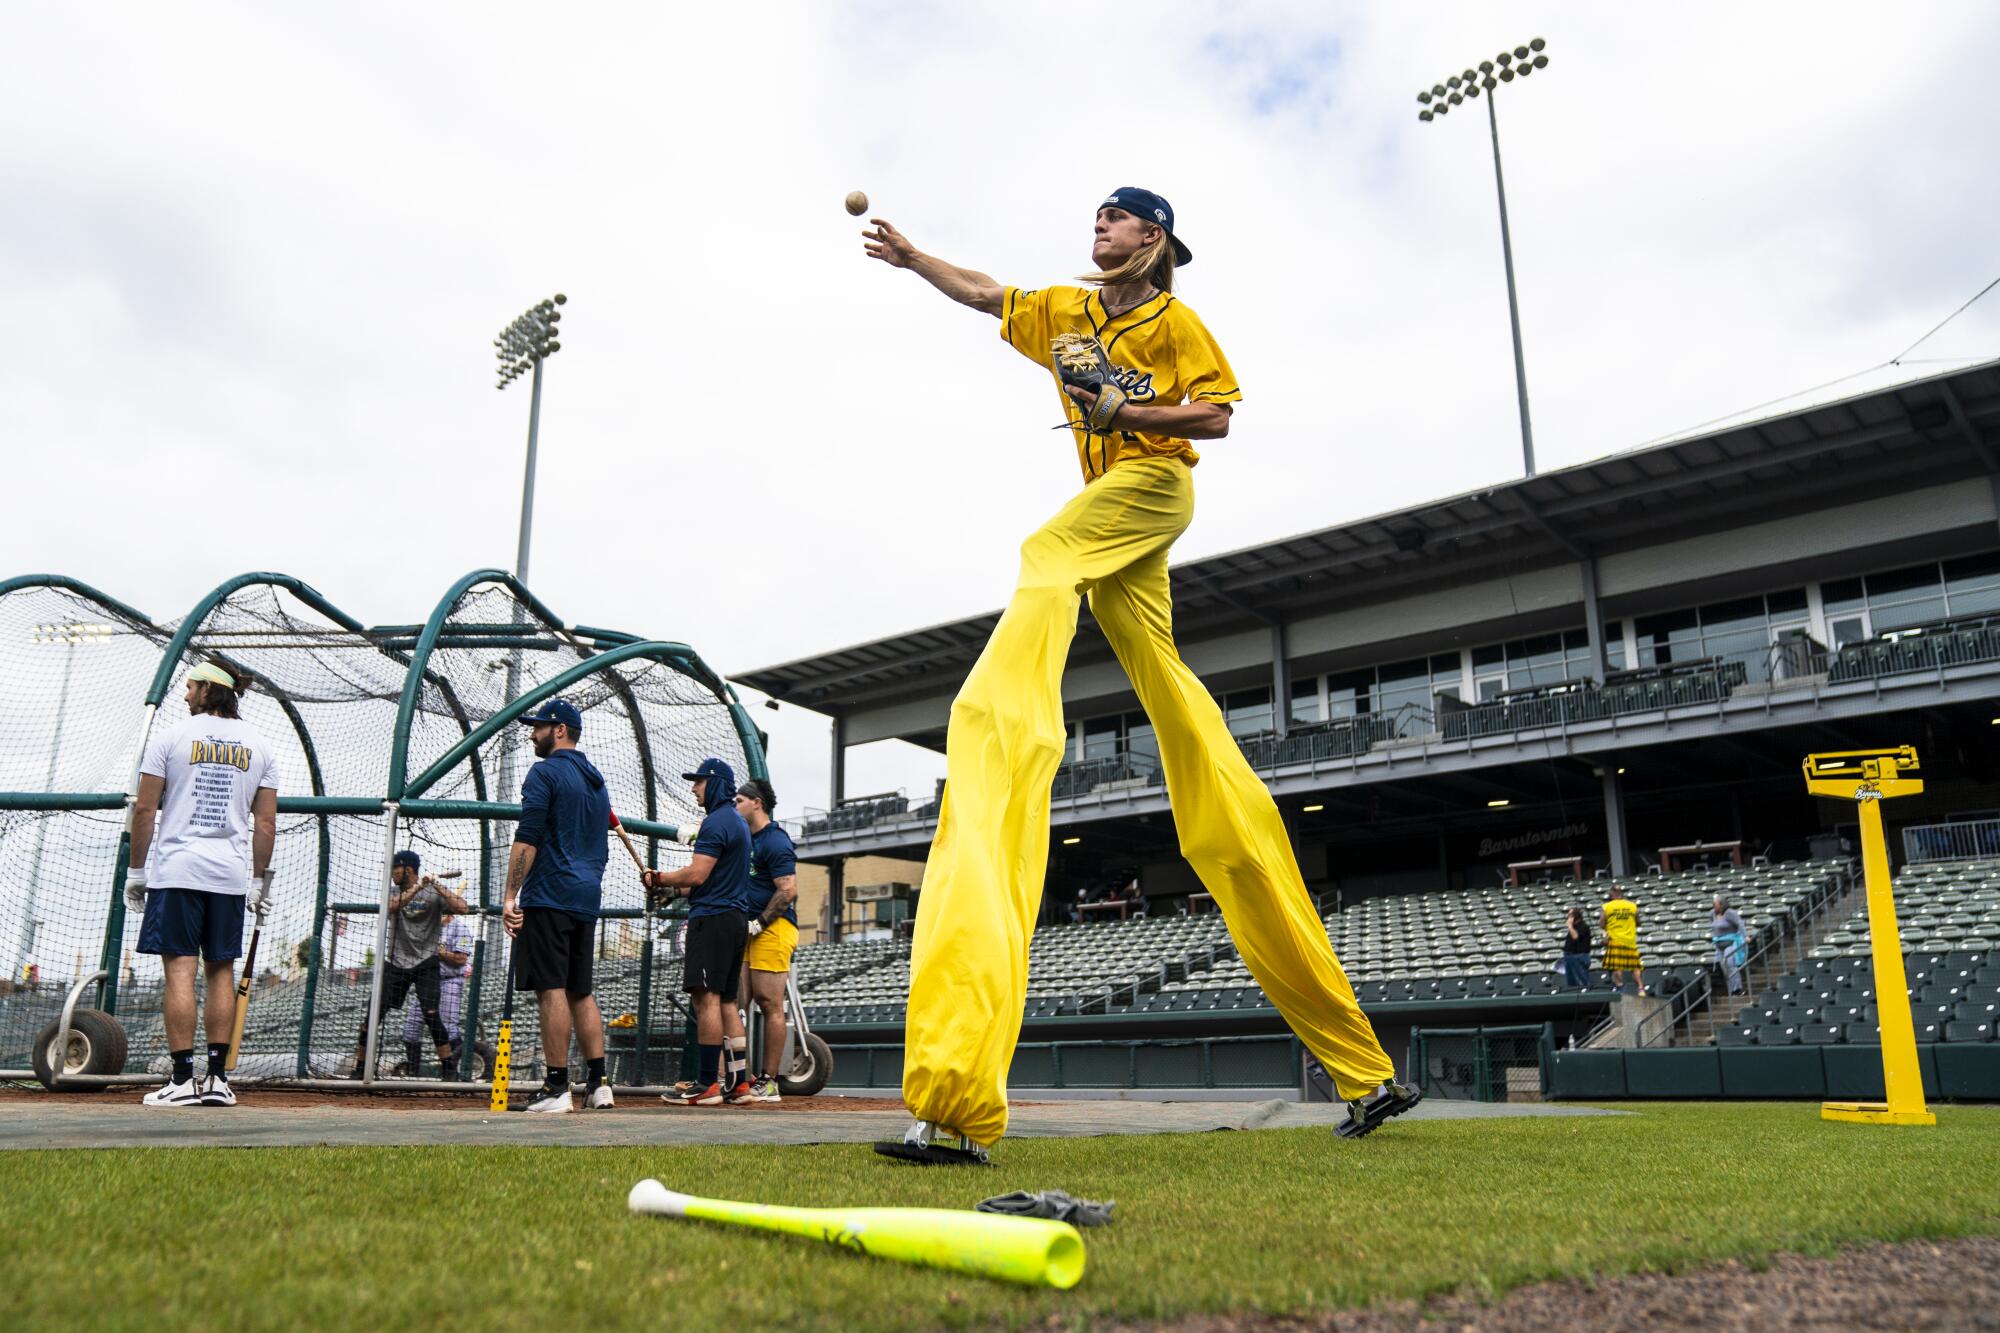 Meet the Savannah Bananas, who wow fans and have MLB's attention - Los  Angeles Times